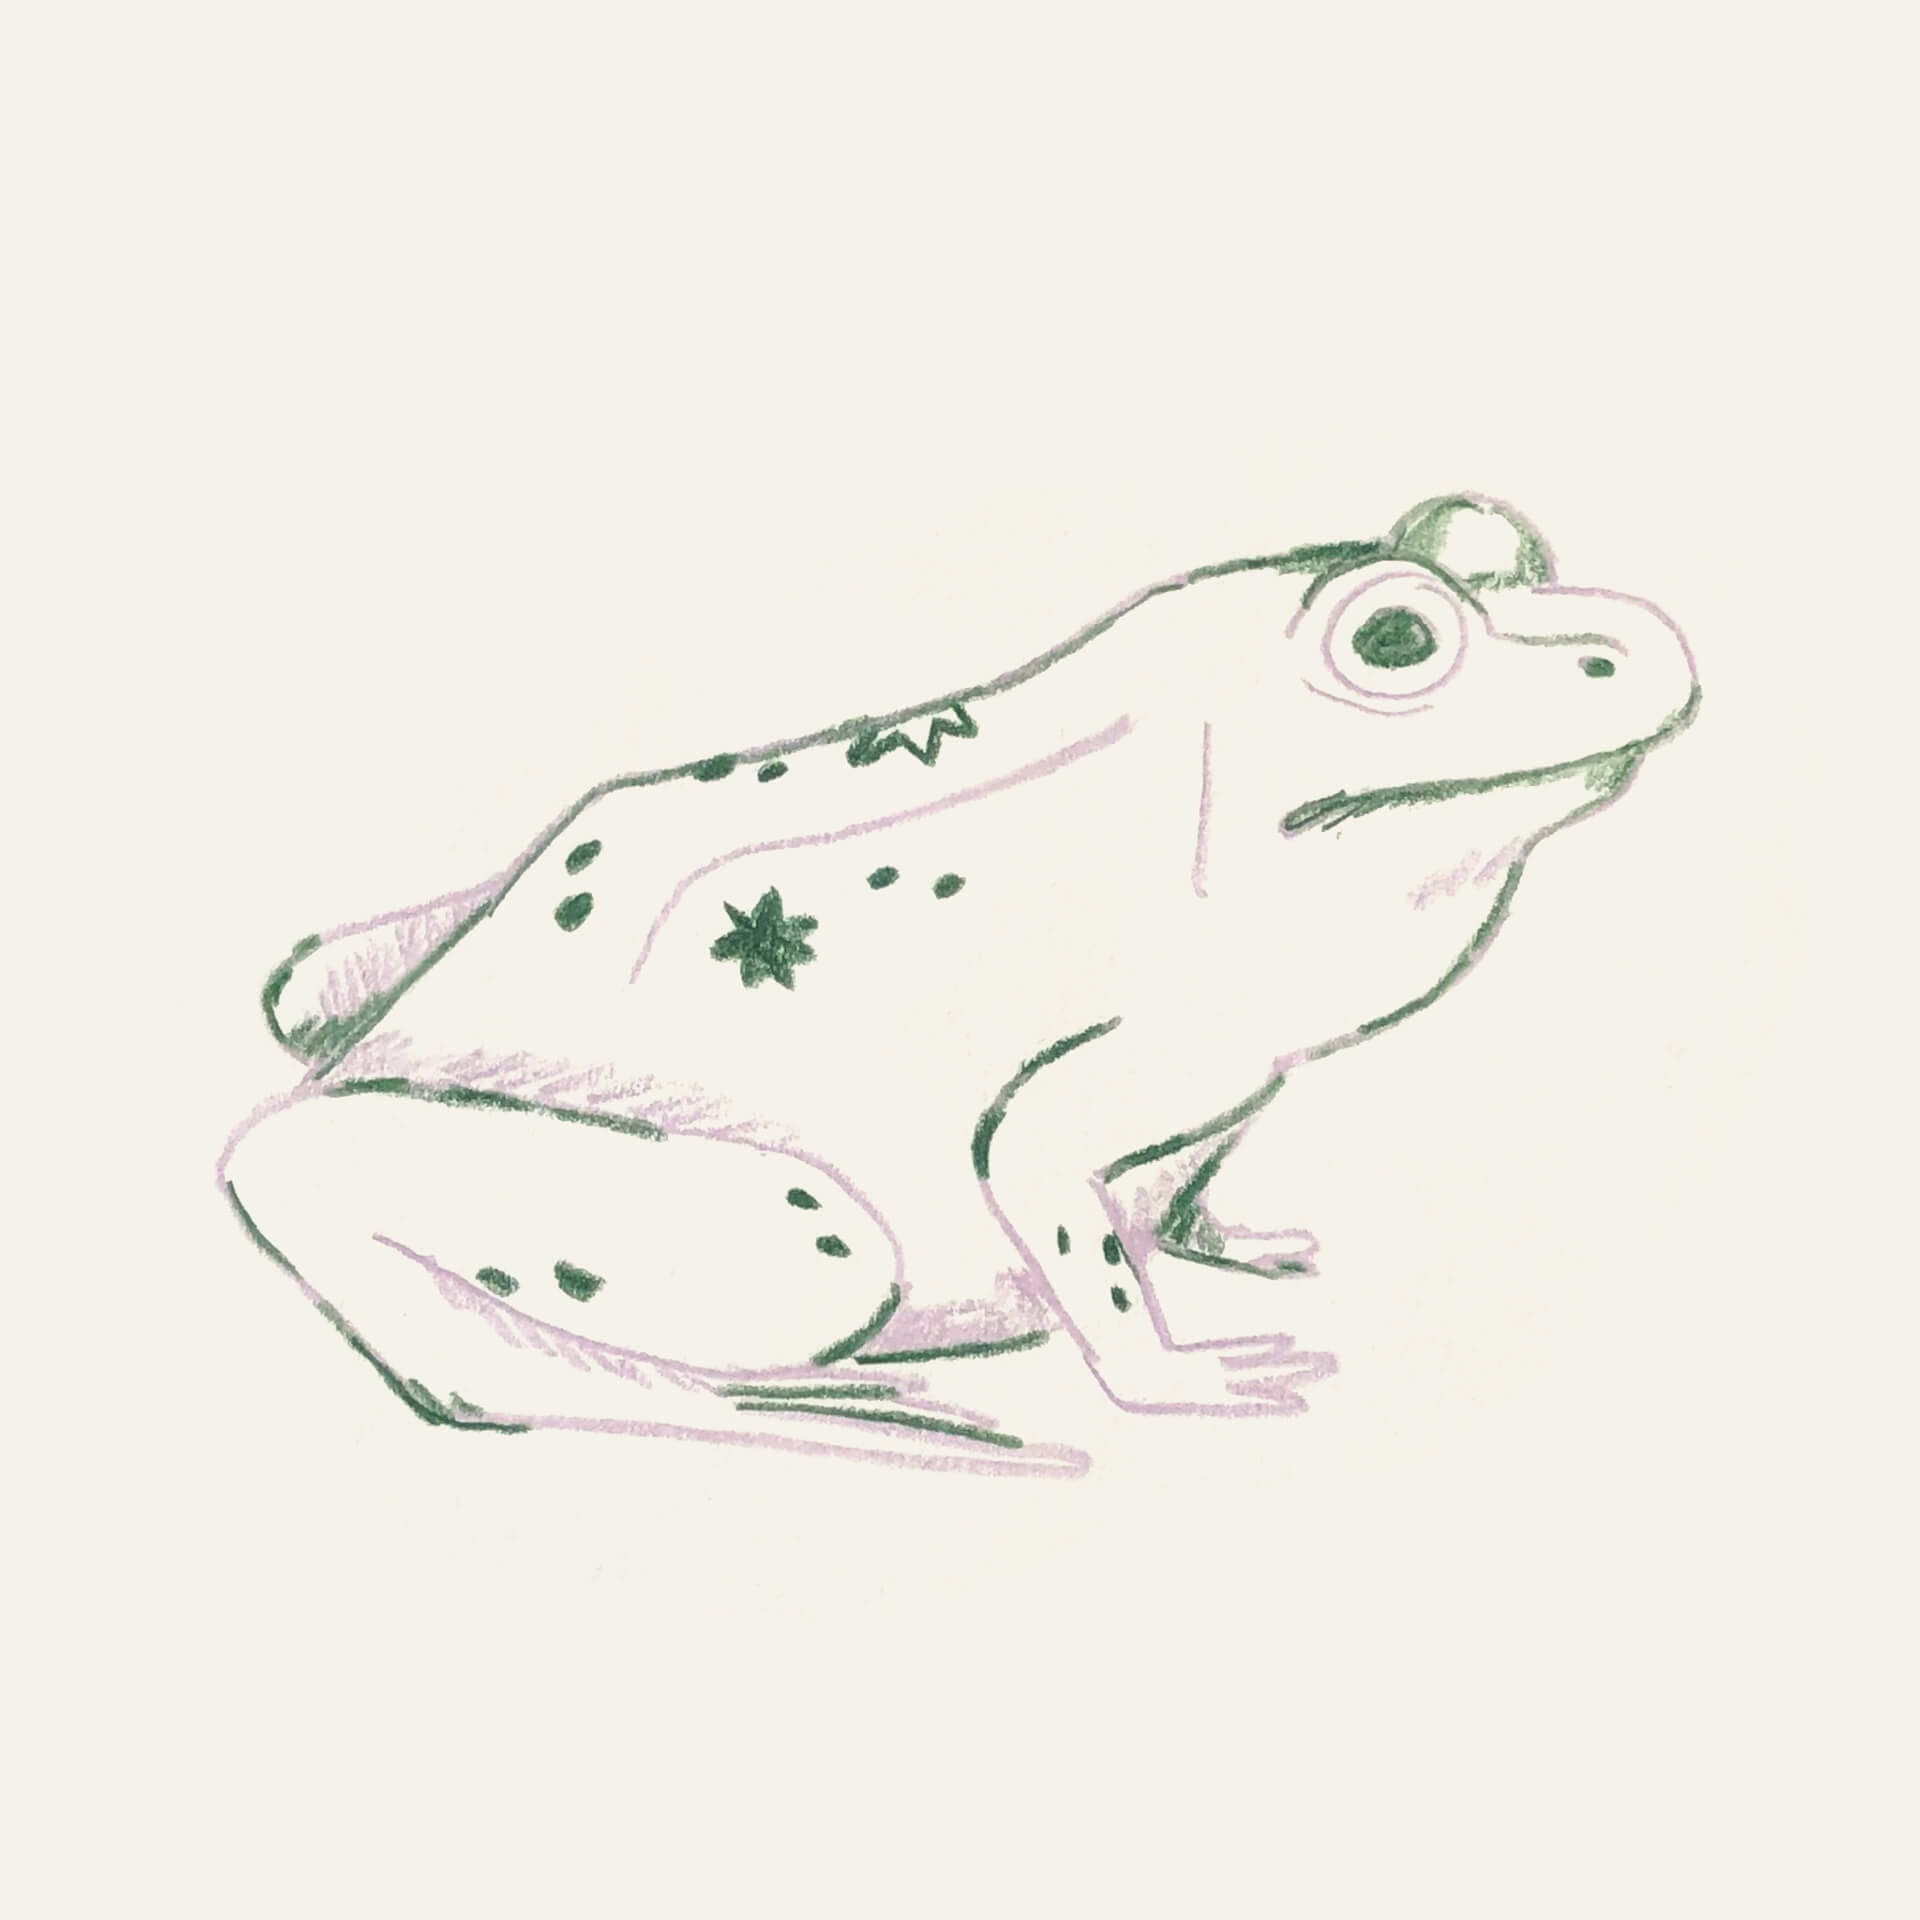 An illustrated sketch of a green and purple frog